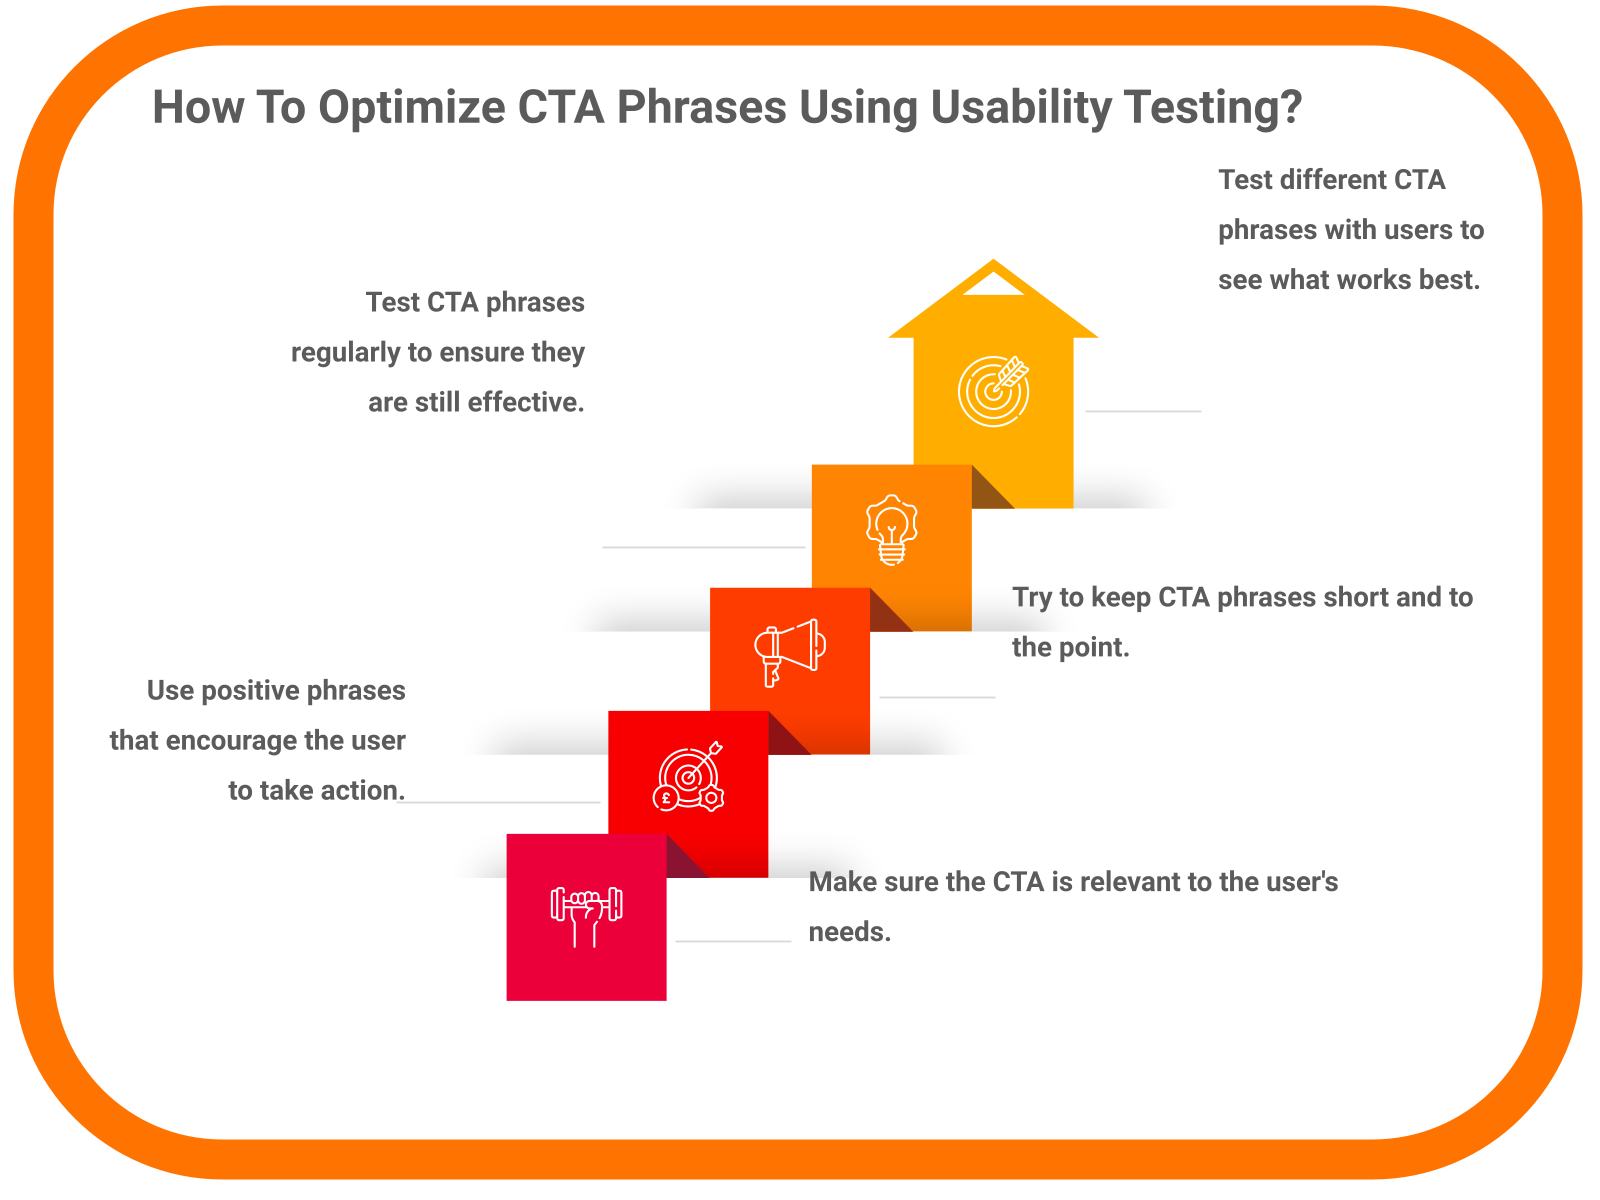 How To Optimize CTA Phrases Using Usability Testing?